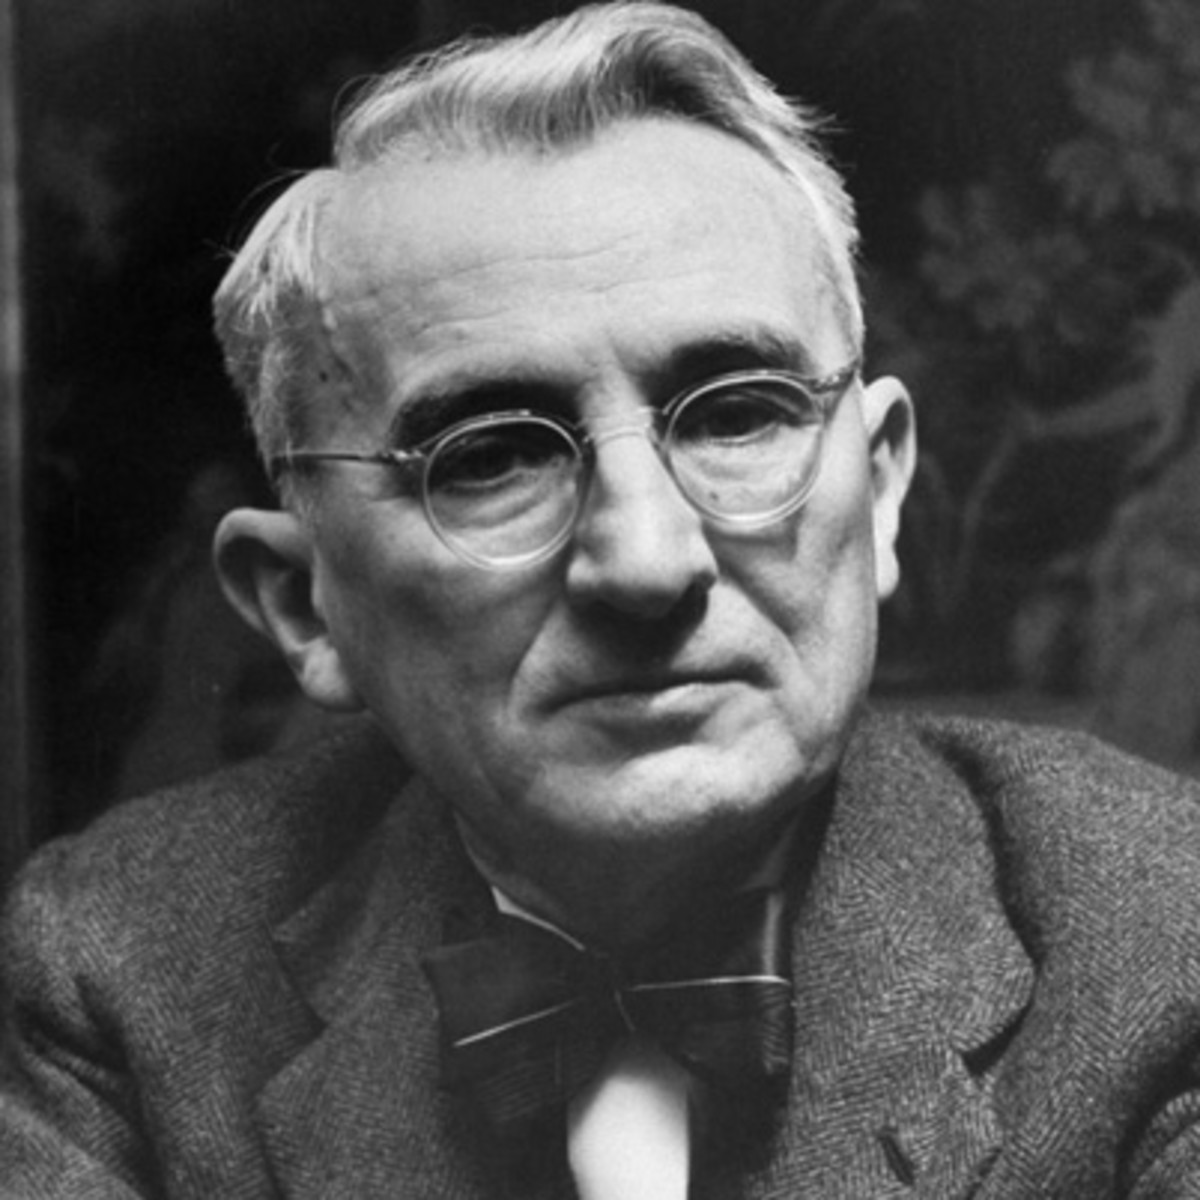 5 Practical Rules to Stop Worrying by Dale Carnegie